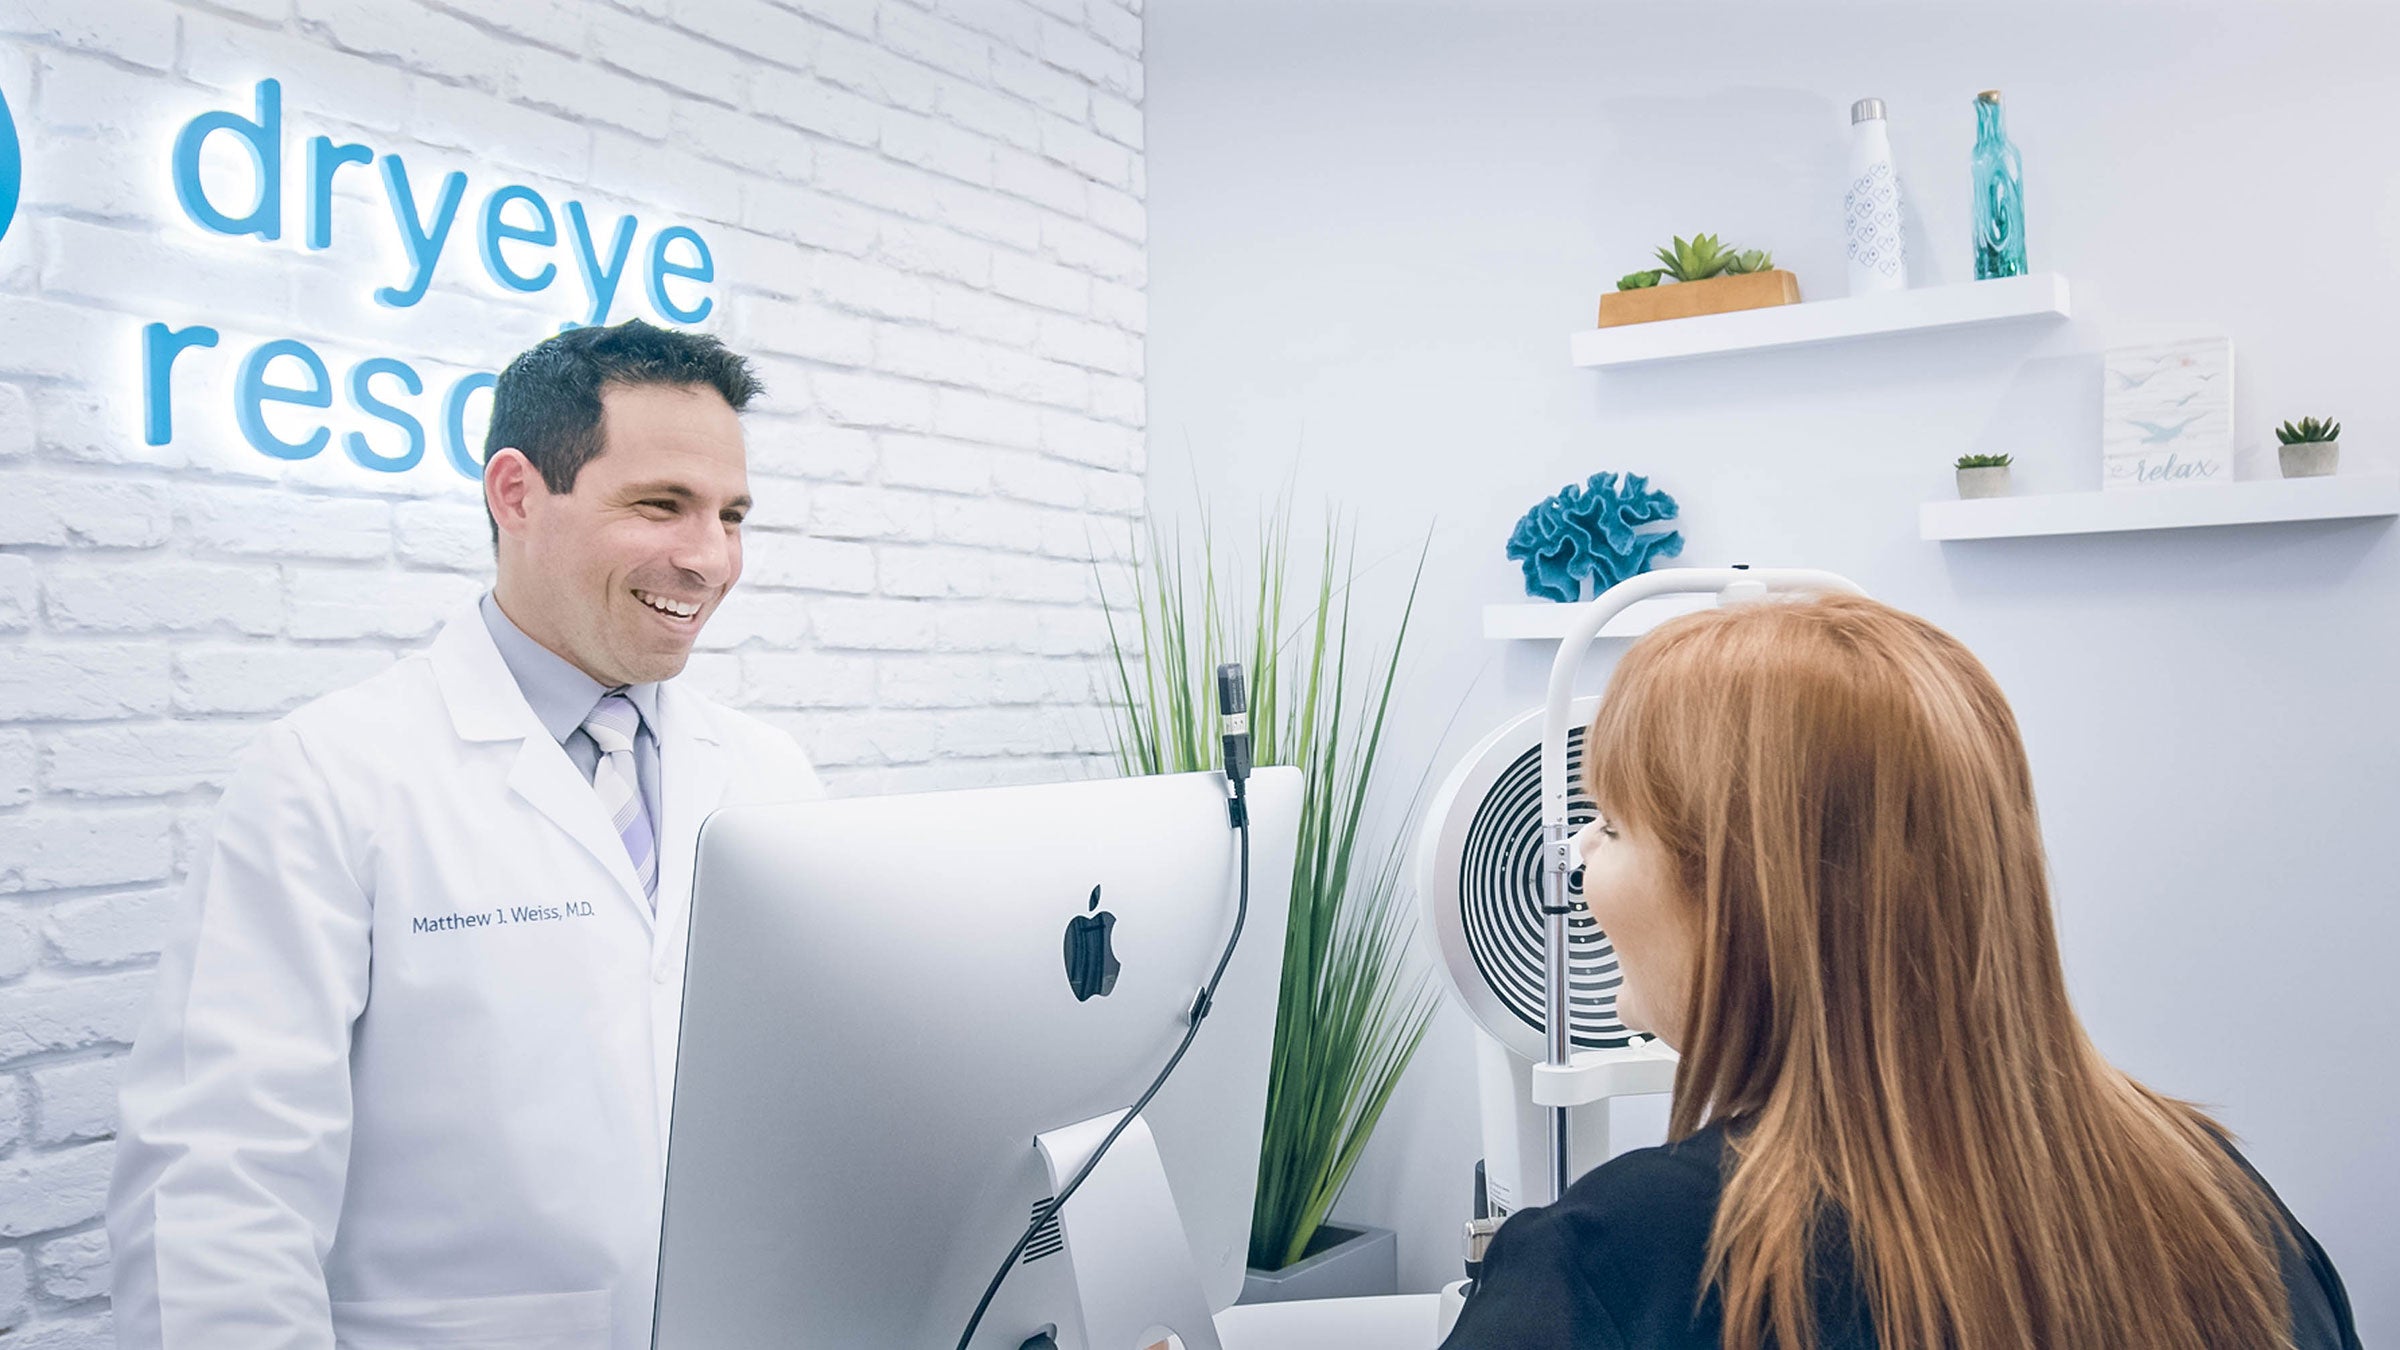 Dry eye doctor speaking to patient